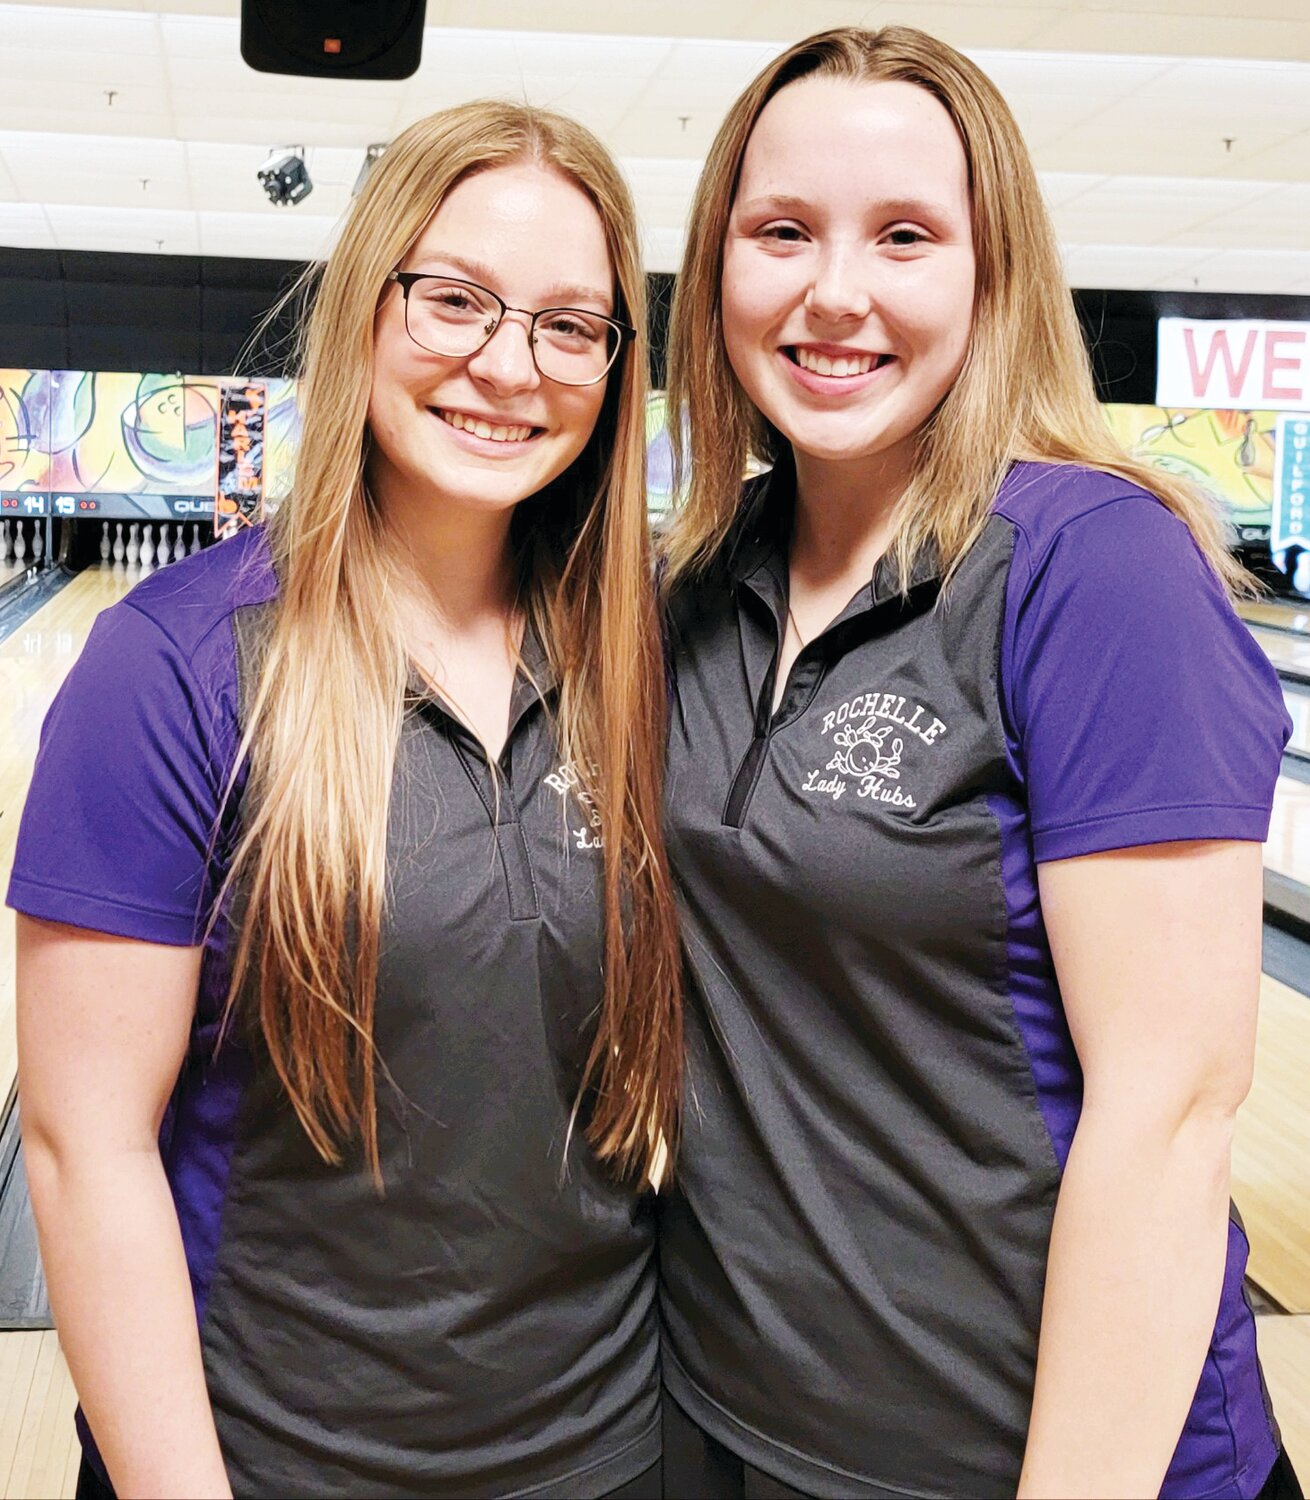 Rochelle Lady Hub varsity bowlers Makenzie Liezert (left) and Cassidy Vincent (right) qualified out of the IHSA Rockford East Regional on Saturday. The two will compete in the IHSA Sycamore Sectional on Saturday, Feb. 10.